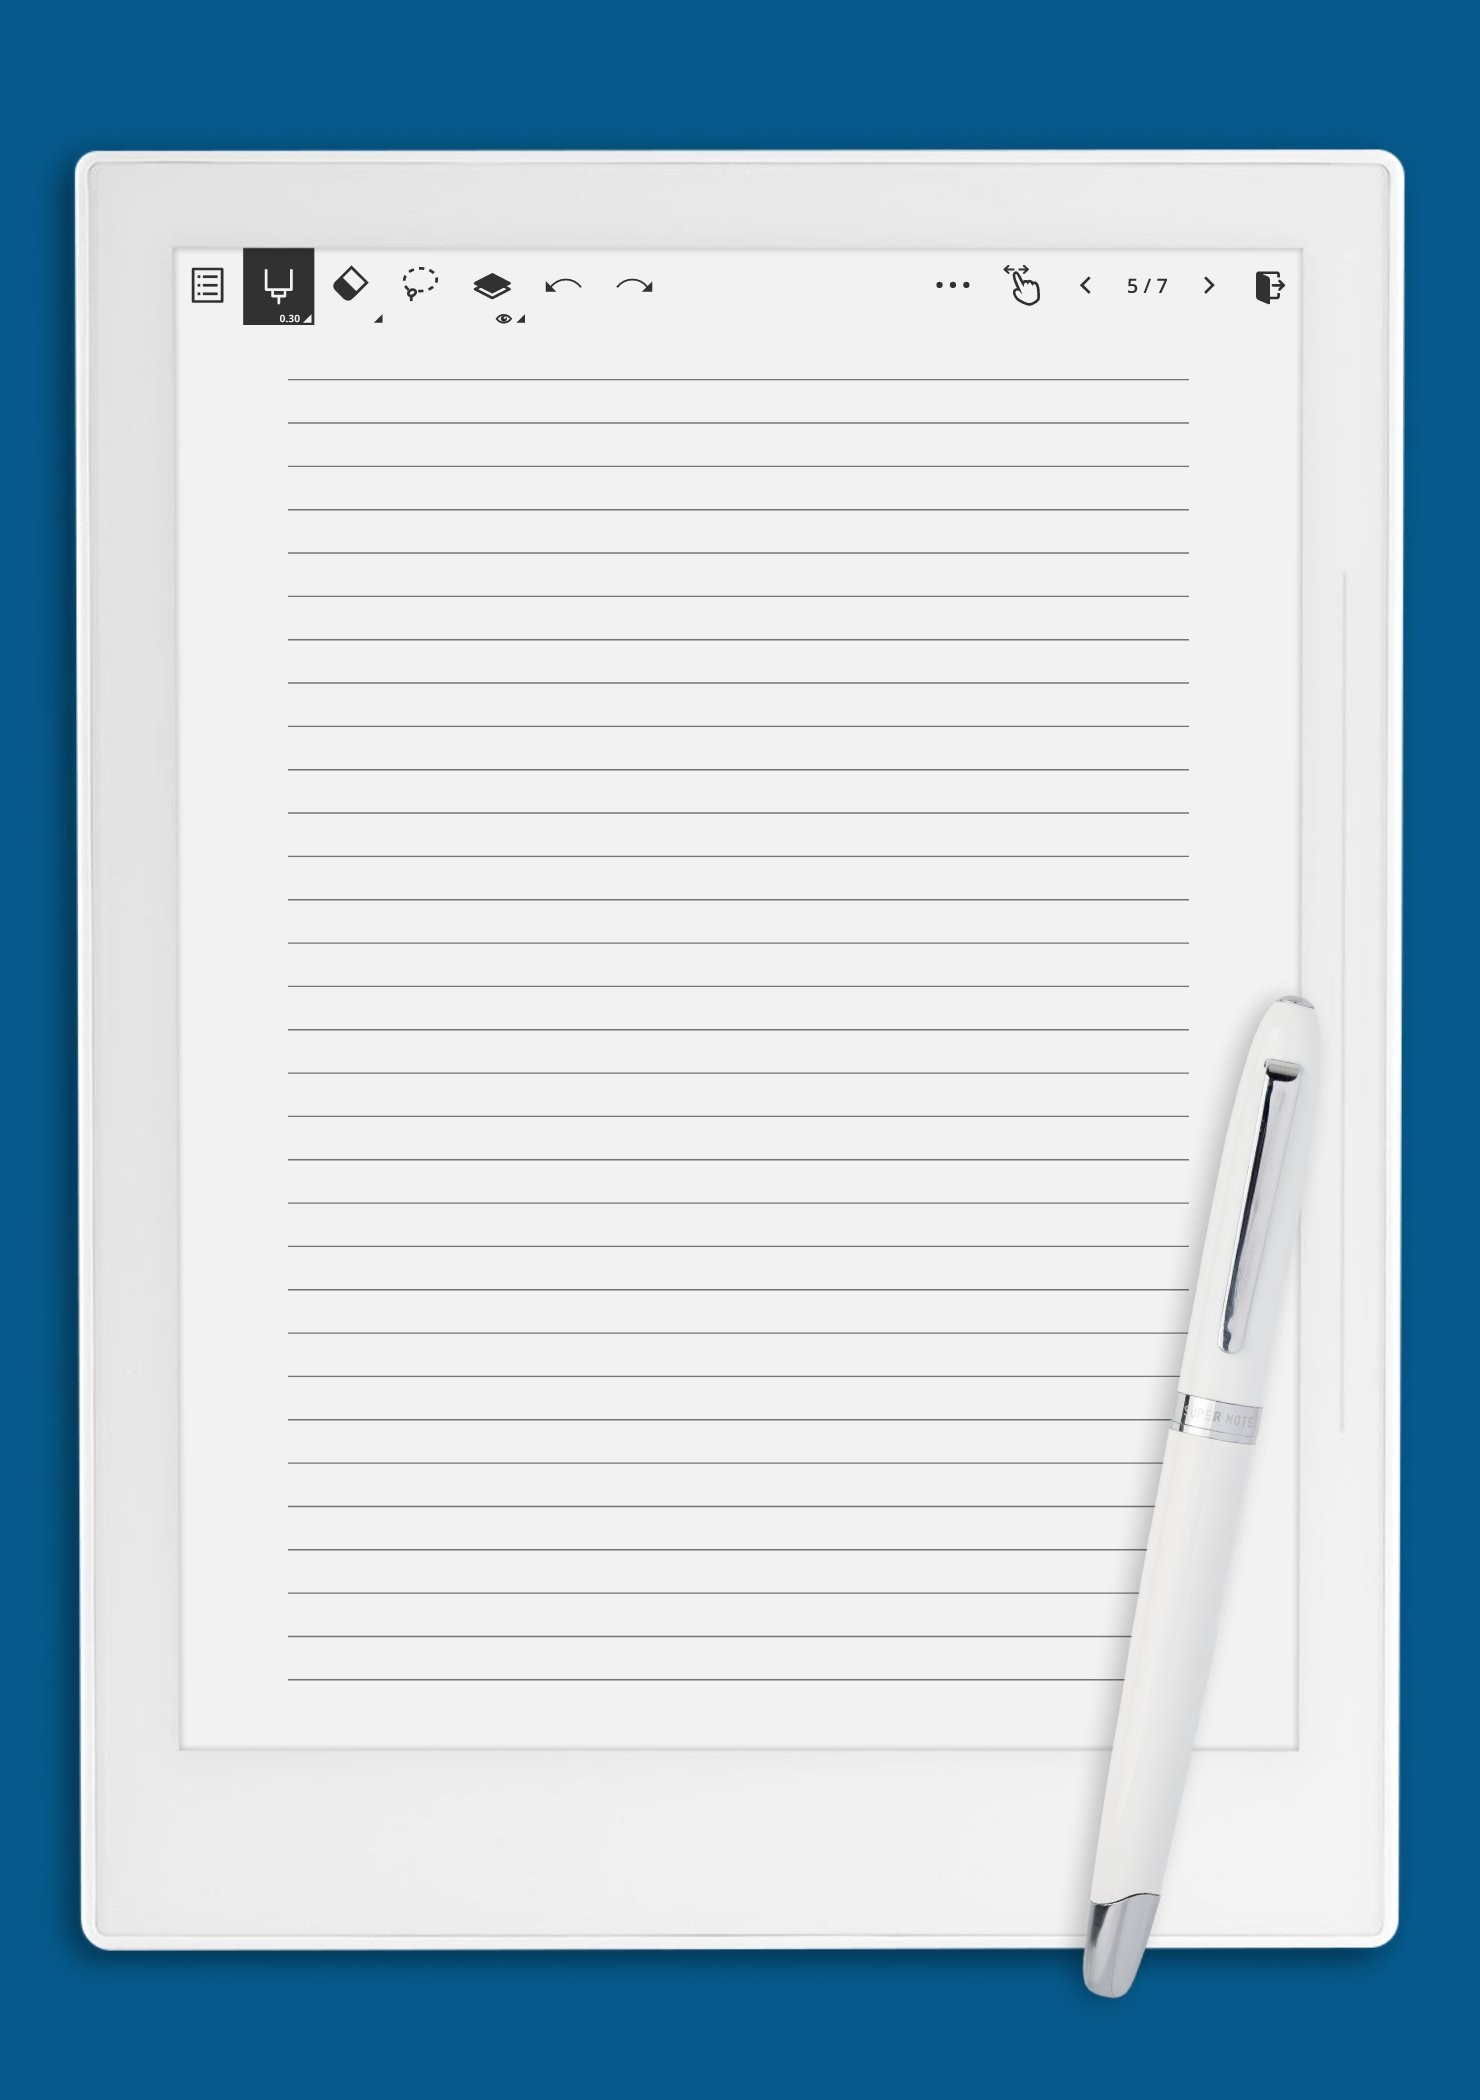 Download Printable Lined Paper Template - Narrow Ruled 1/4 inch PDF